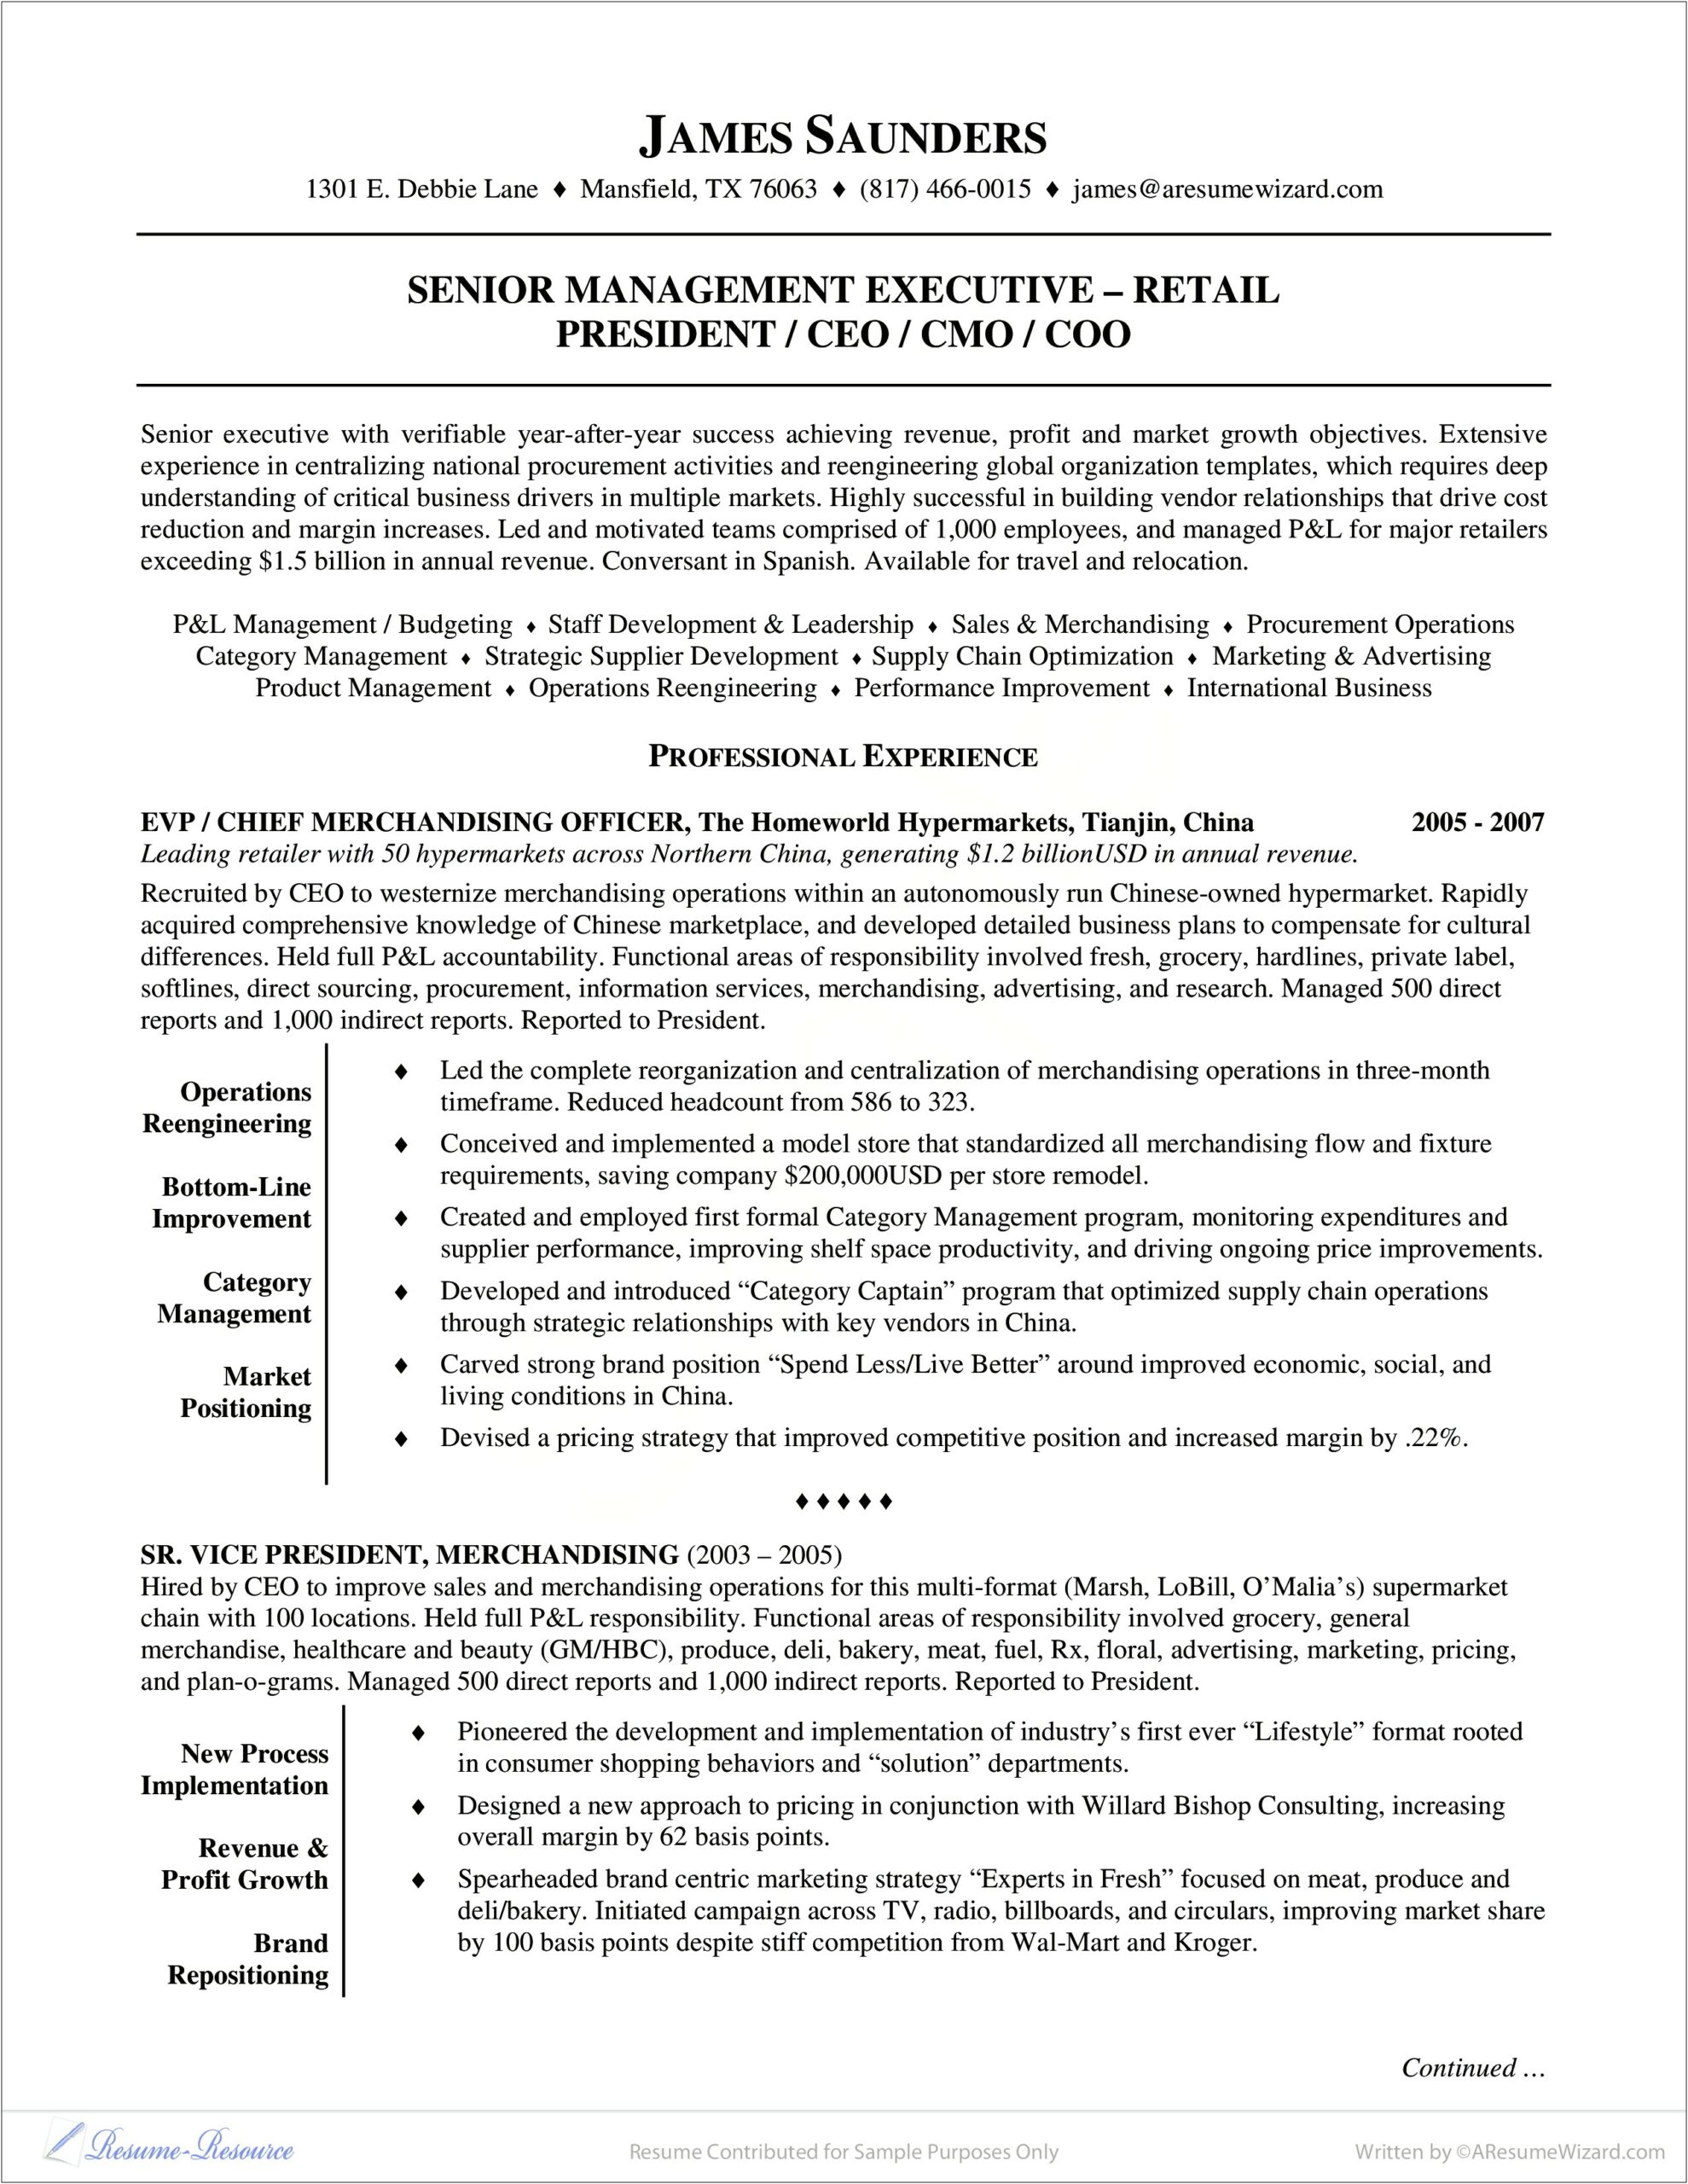 Executive Resume Samples Director Of Product Management